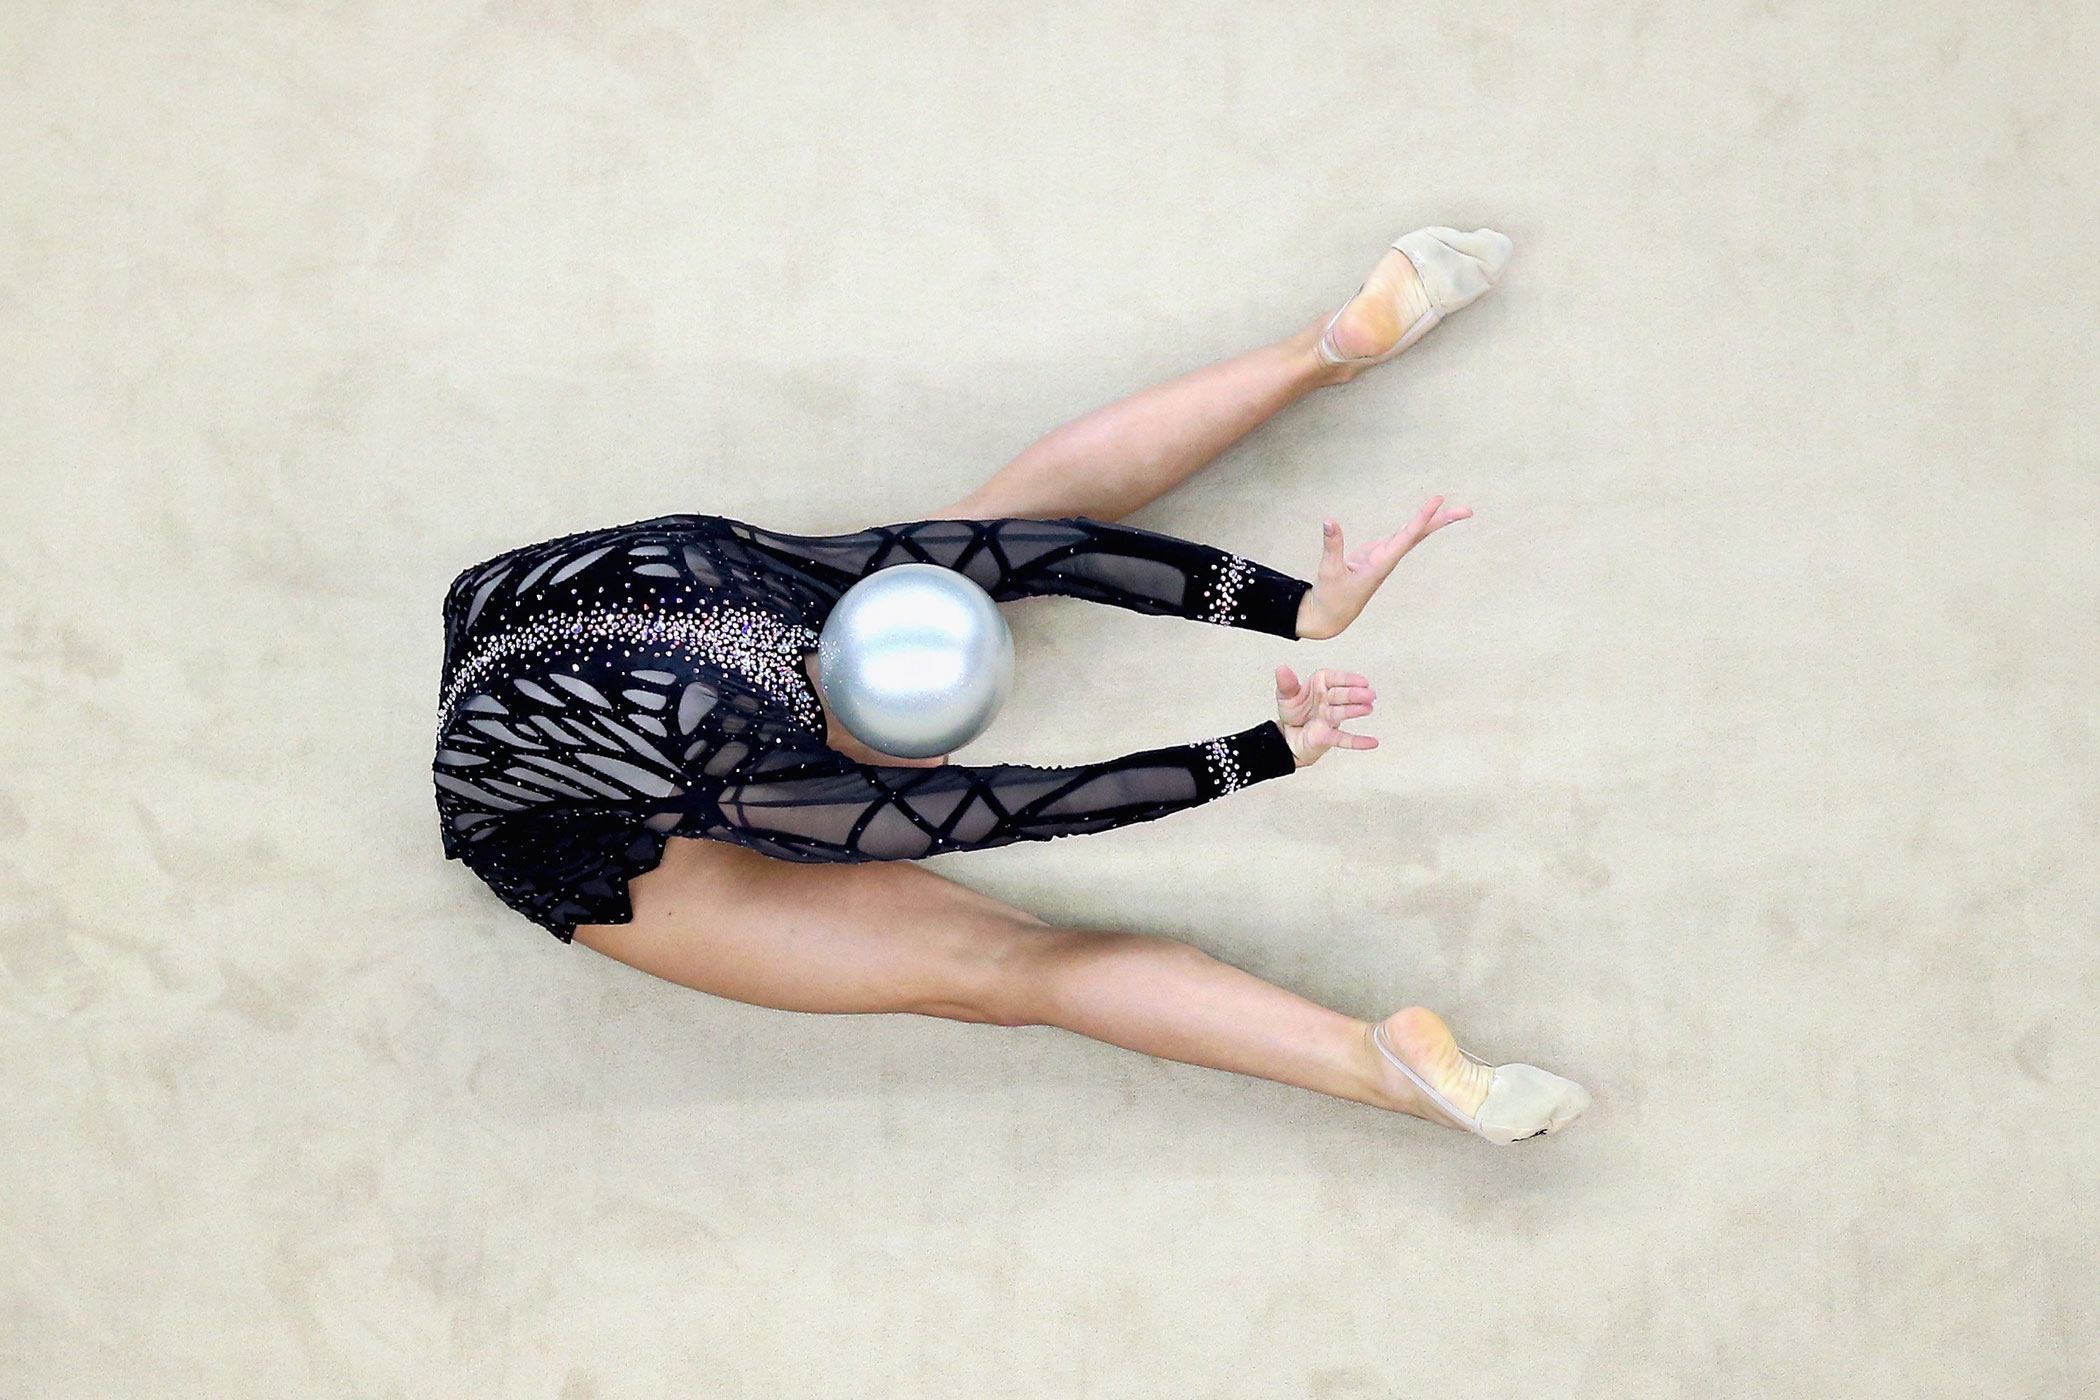 Shannon Gardiner of South Africa competes in Rhythmic Gymnastics Individual All-Around Qualification on day ten of the Nanjing 2014 Summer Youth Olympic Games at Nanjing OSC Gymnasium on Aug. 26, 2014 in Nanjing.